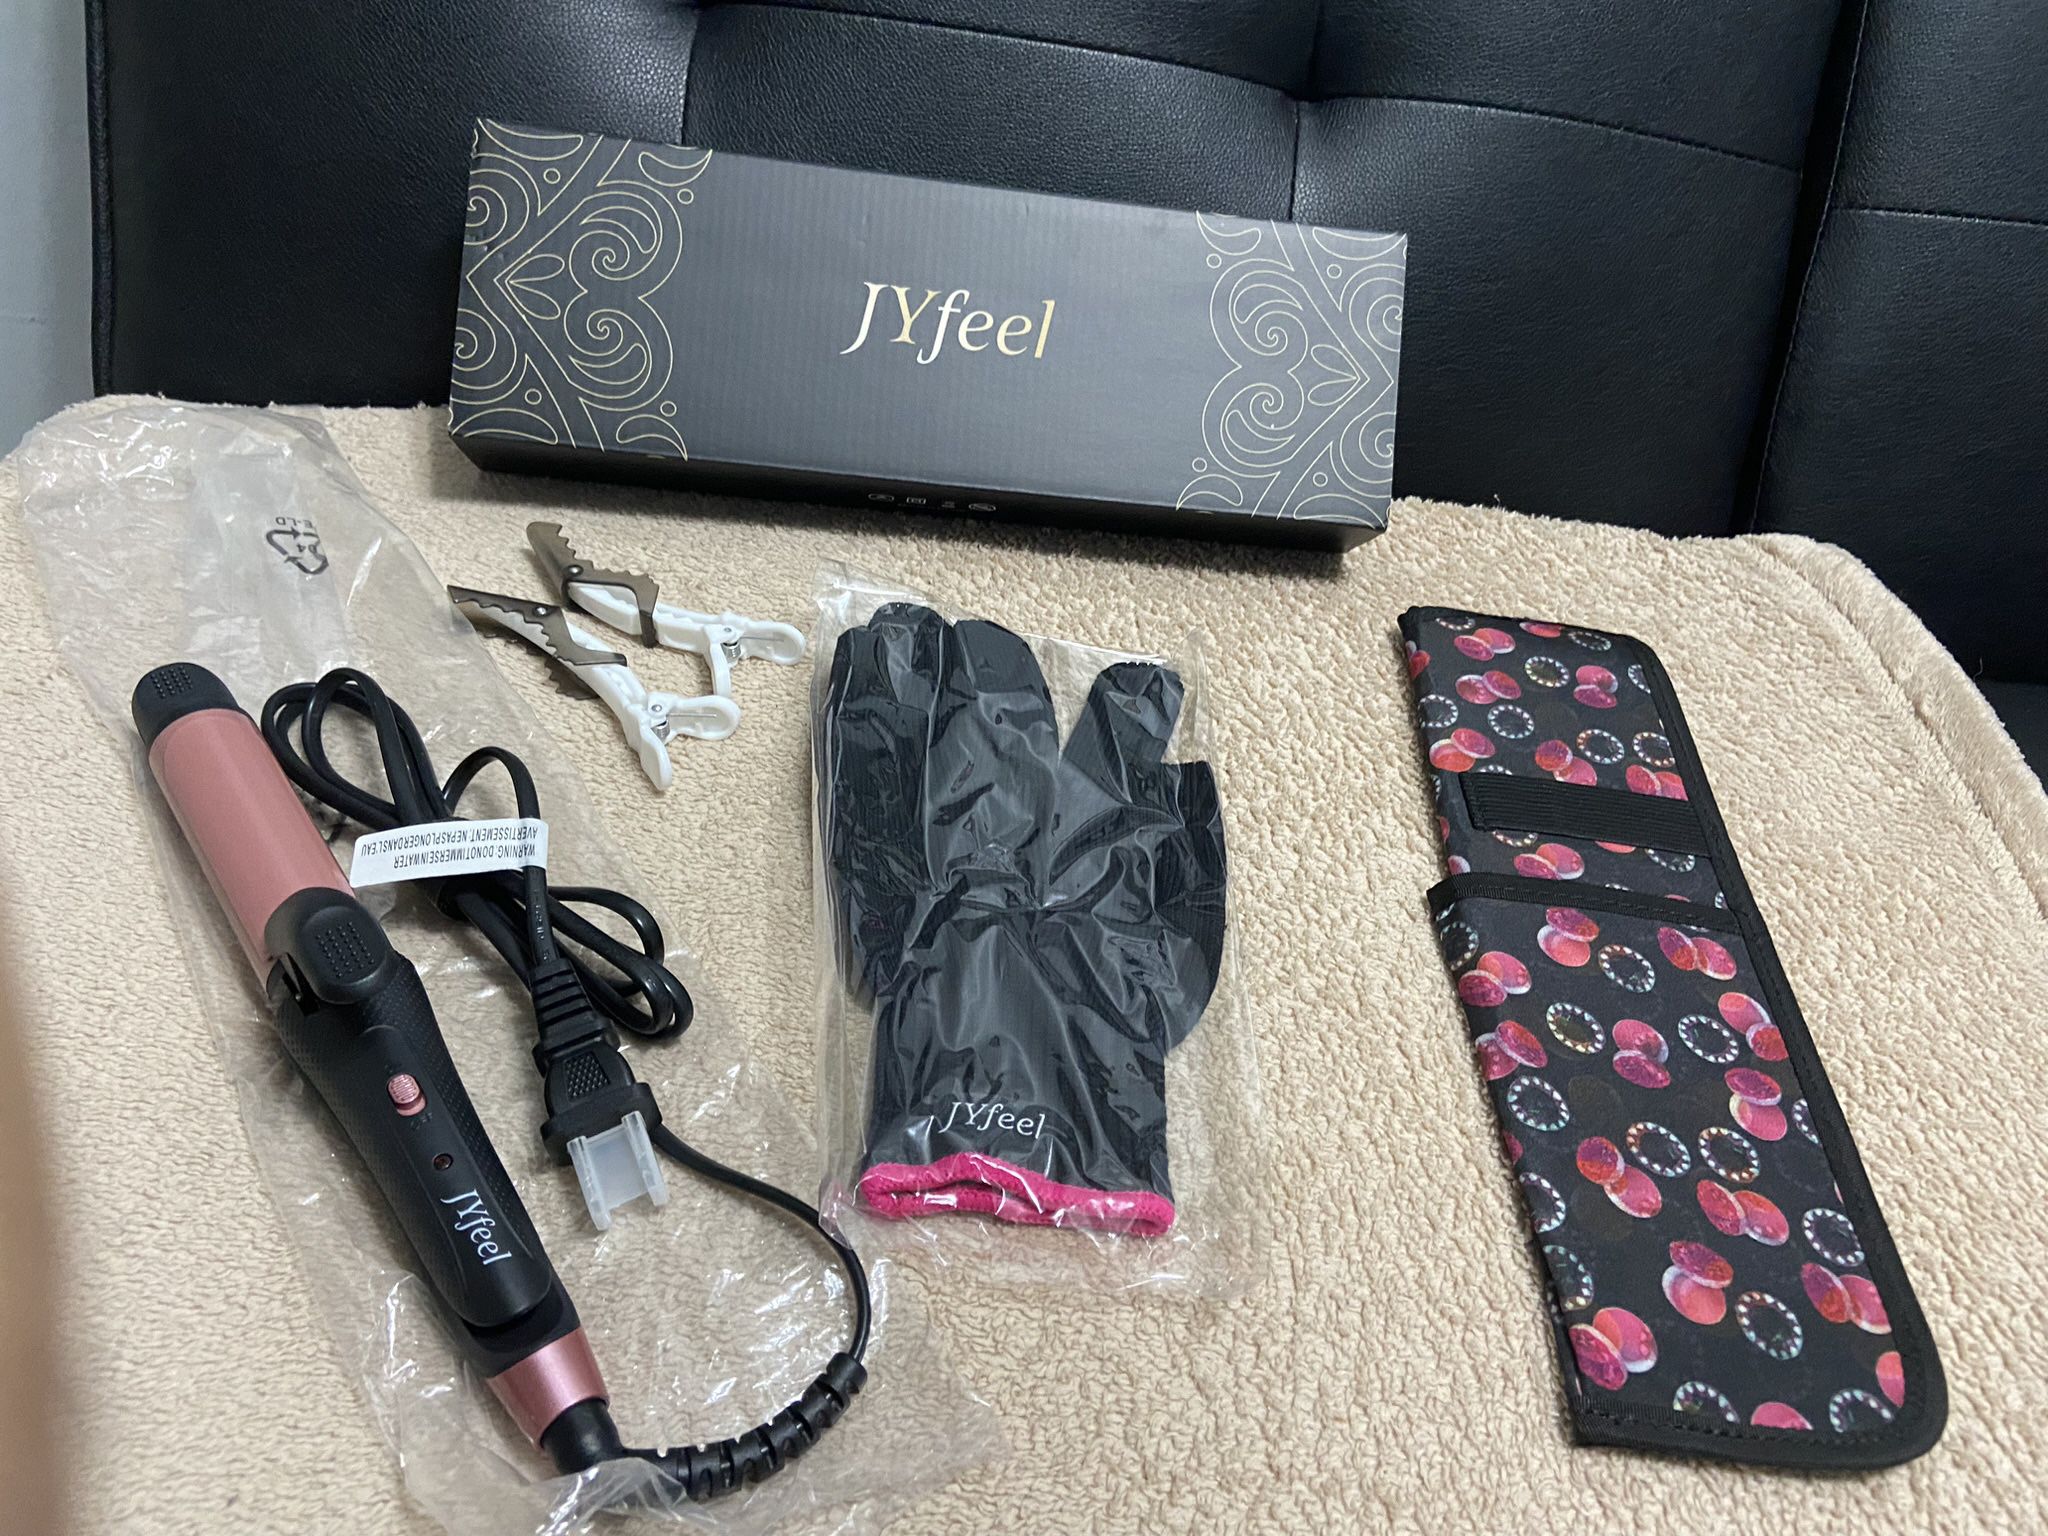 NEW JYfeel 2 in 1 Travel Curling Flat Iron Dual Voltage Mini Hair Straightener and Curler